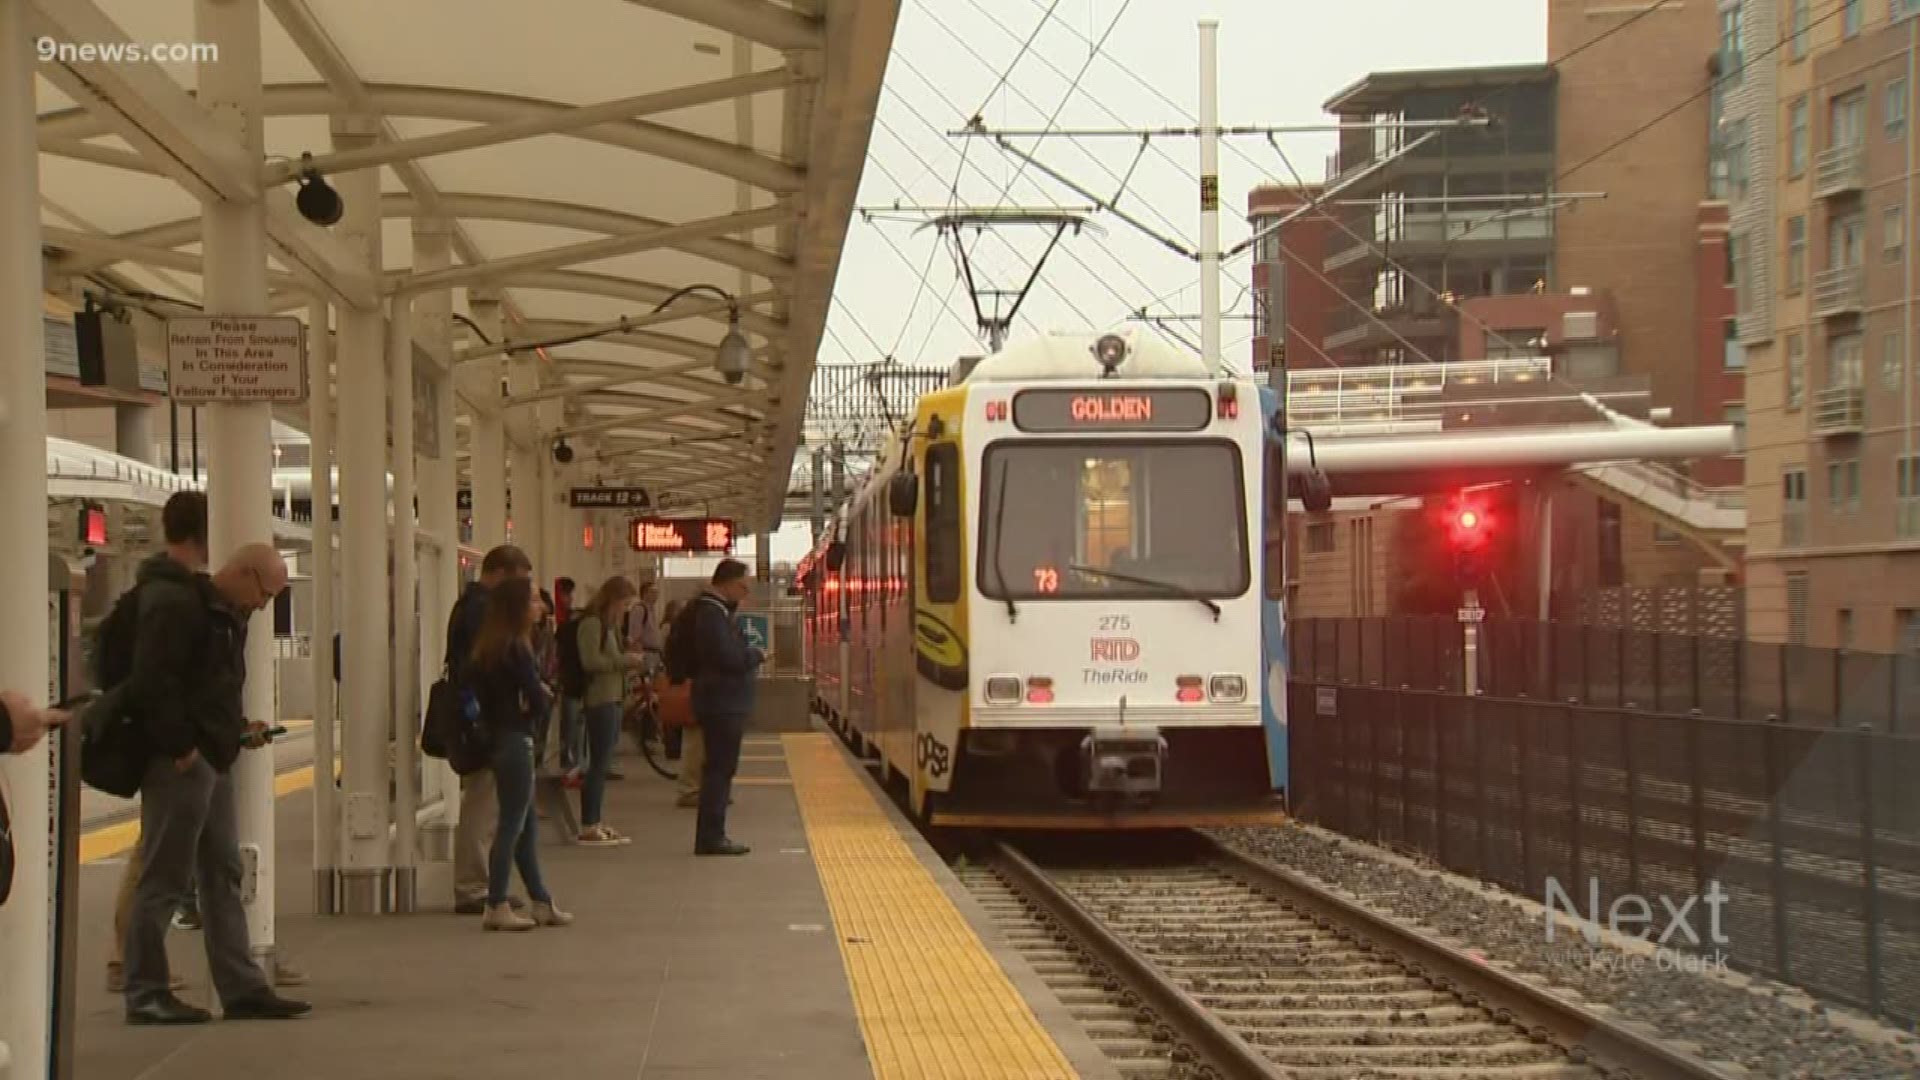 RTD is contemplating service cuts to boost reliability and confidence among riders as they continue to deal with a shortage of bus drivers and light rail operators.